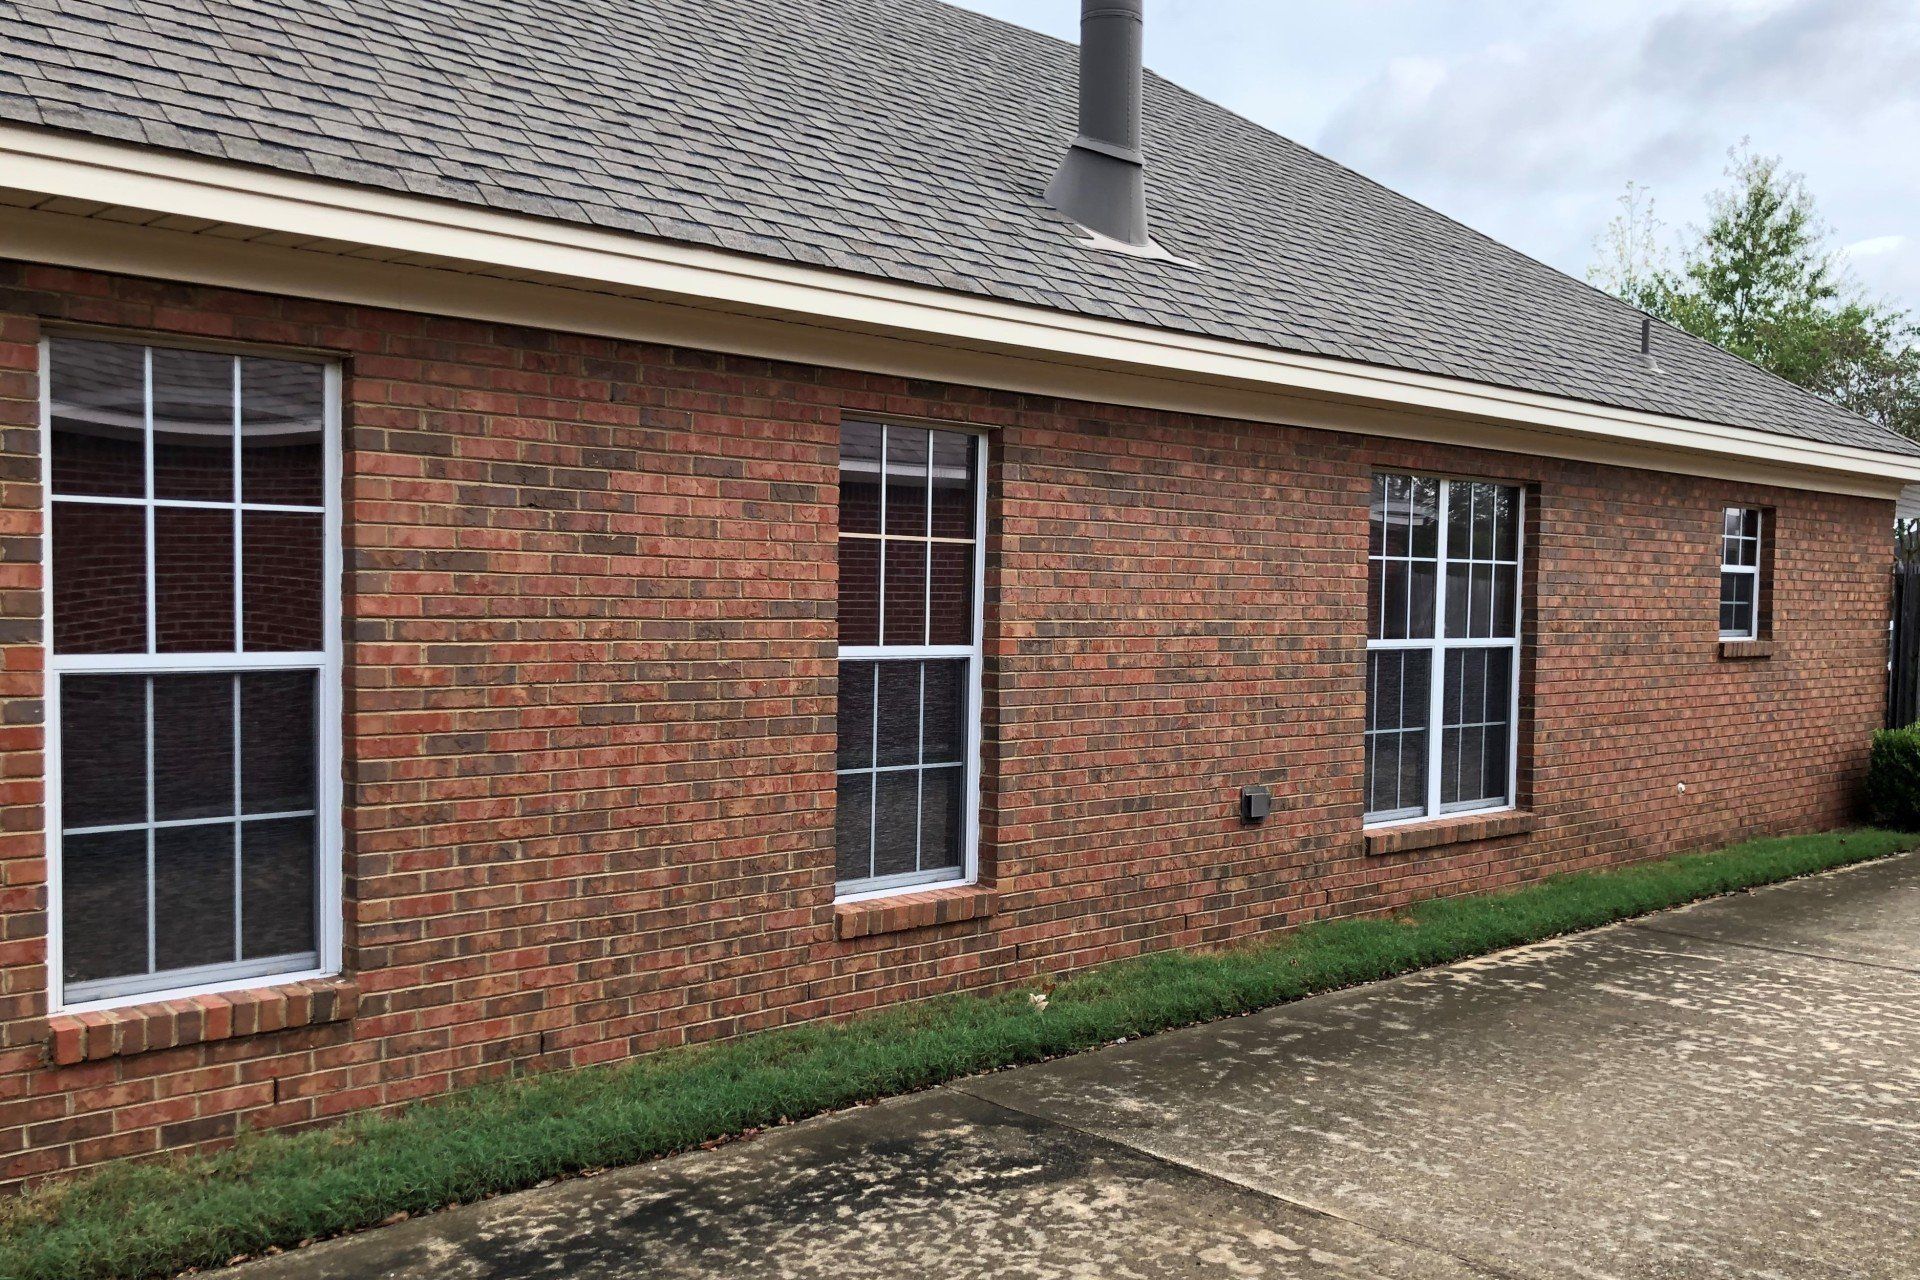 professional home window tinting service in Montgomery - home tint blocked Sun fade and reduced chances of skin cancer while keeping the good Sunlight inside on 10.16.2019